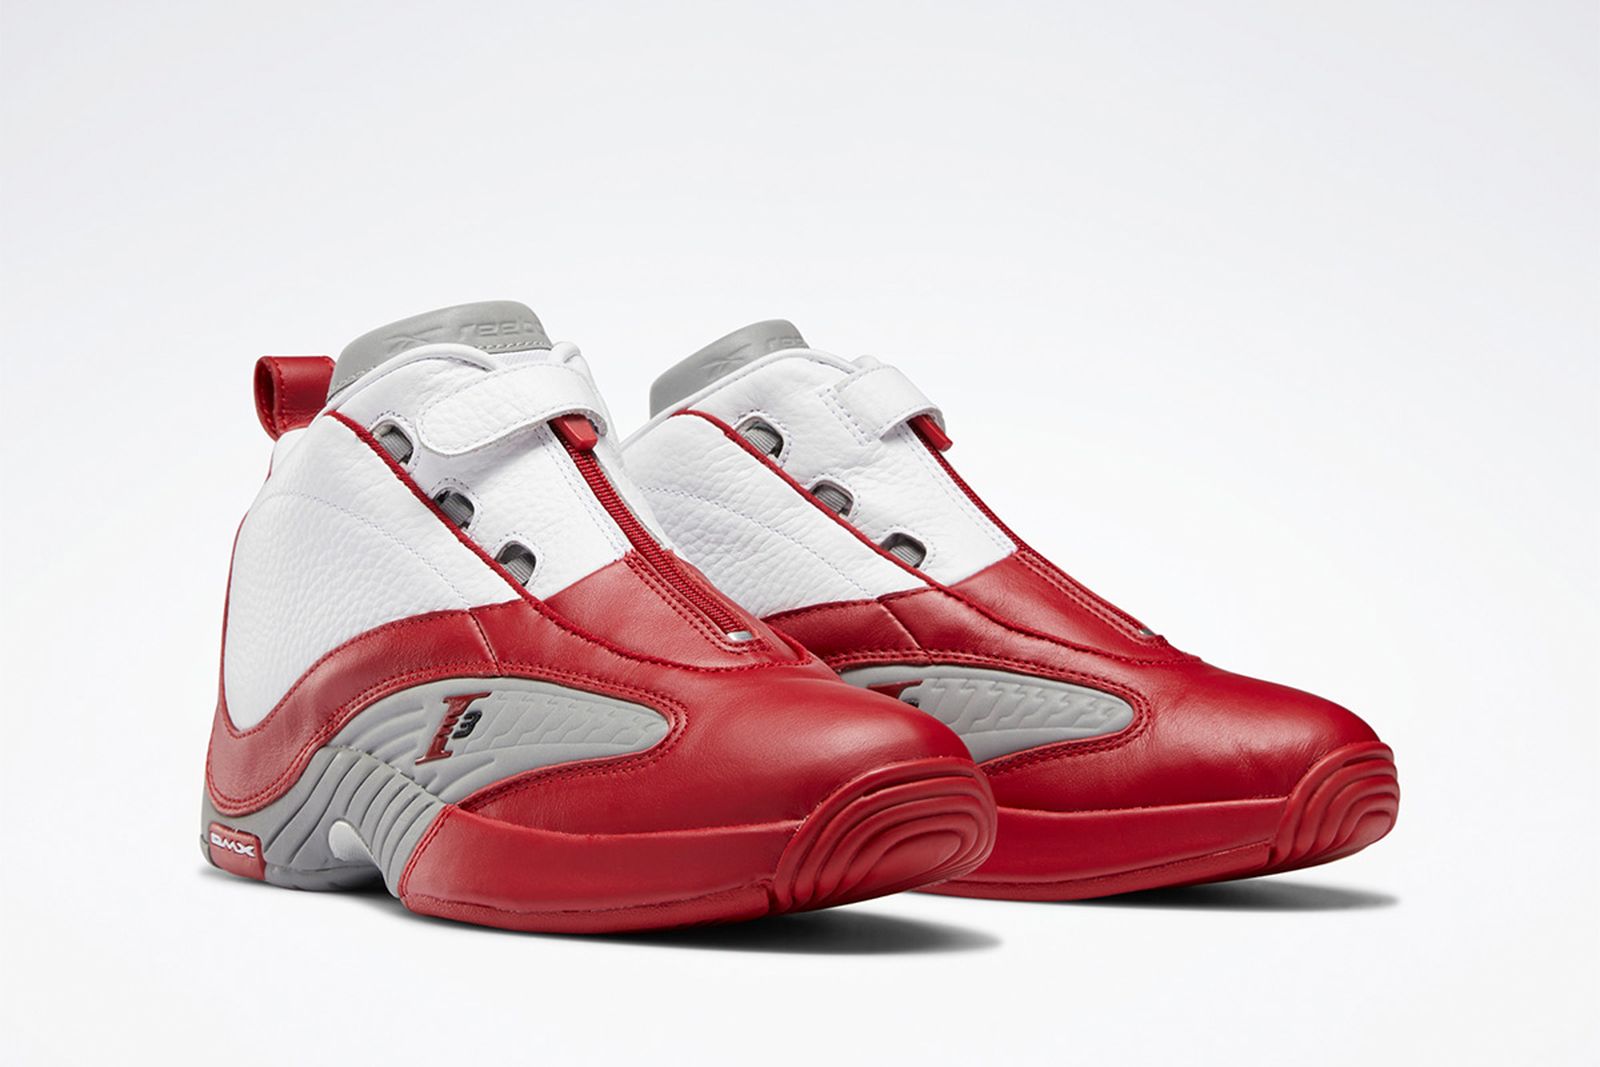 Are Reebok Shoes Good for Basketball? 